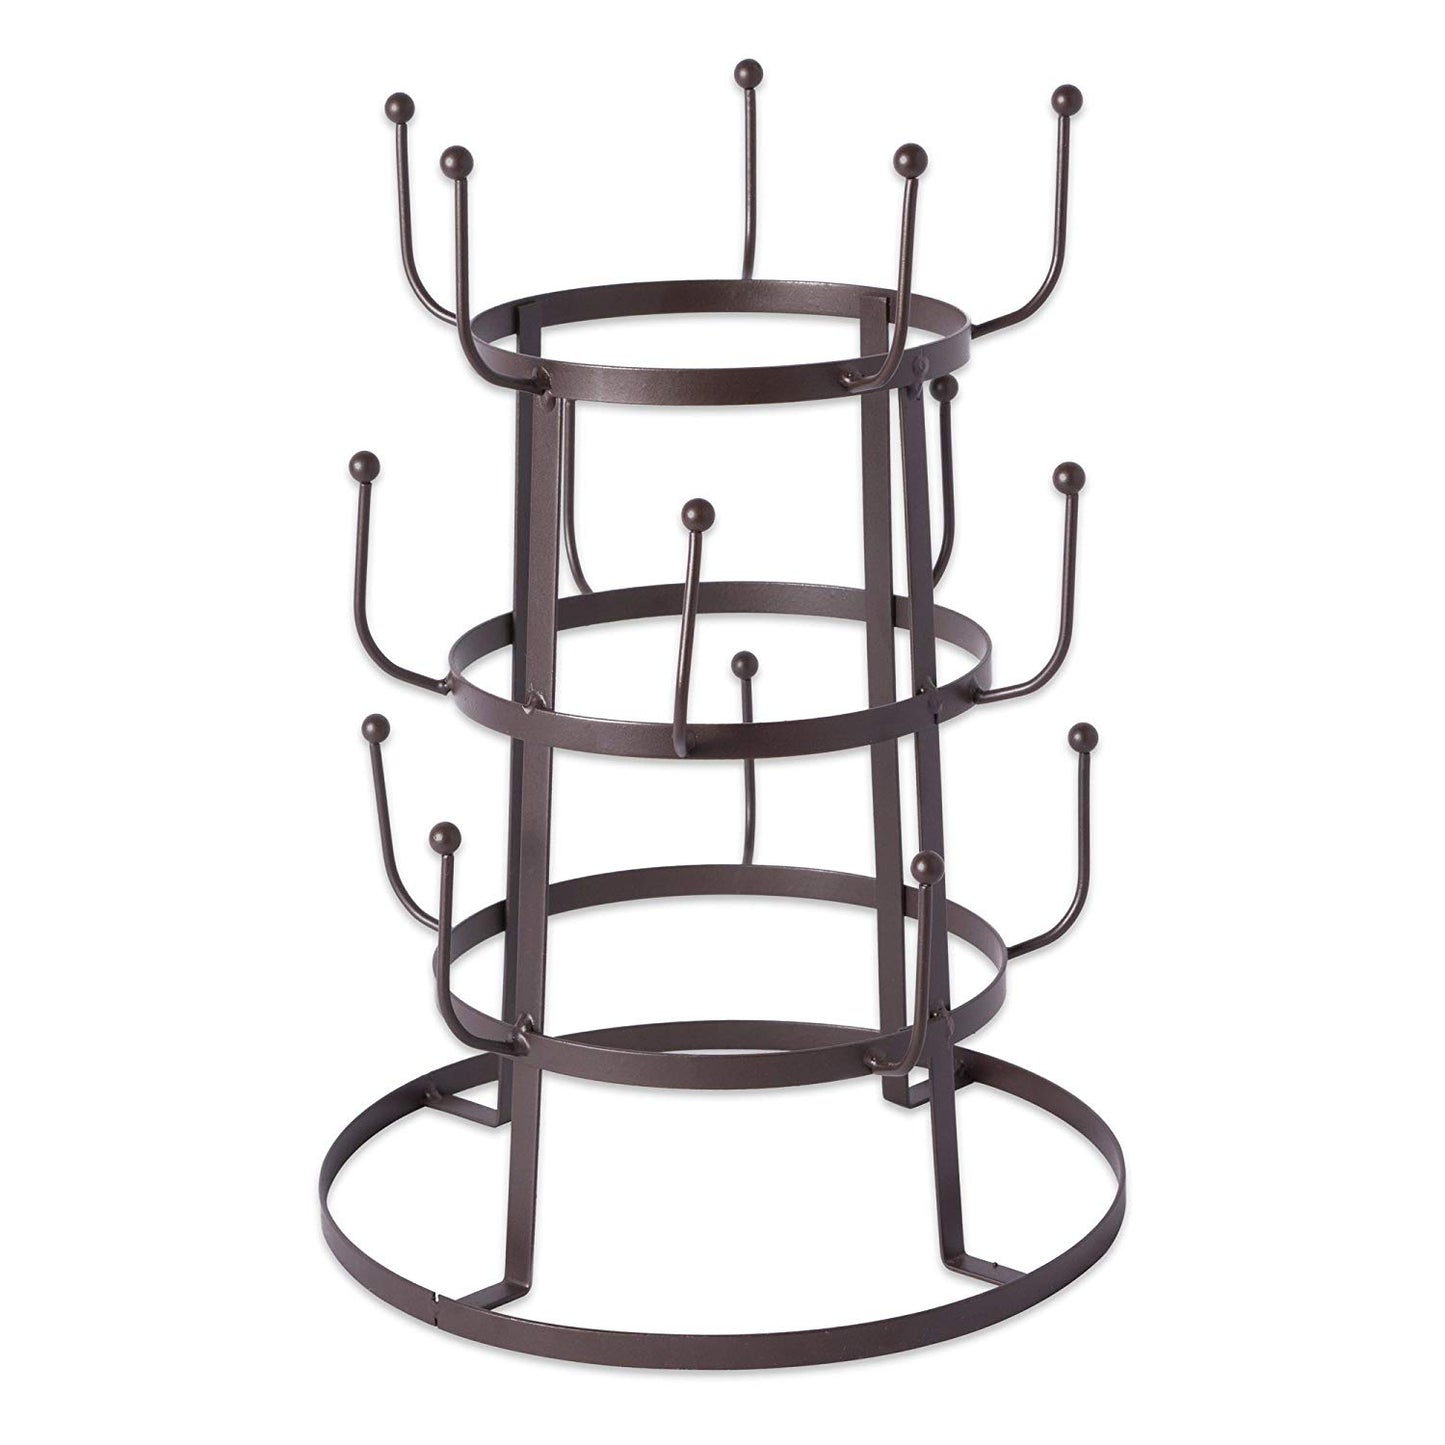 Home Traditions 3 Tier Countertop or Pantry Vintage Metal Wire Tree Stand for Coffee Mugs, Glasses, and Cups, 15 Mug Capacity, Rustic Bronze